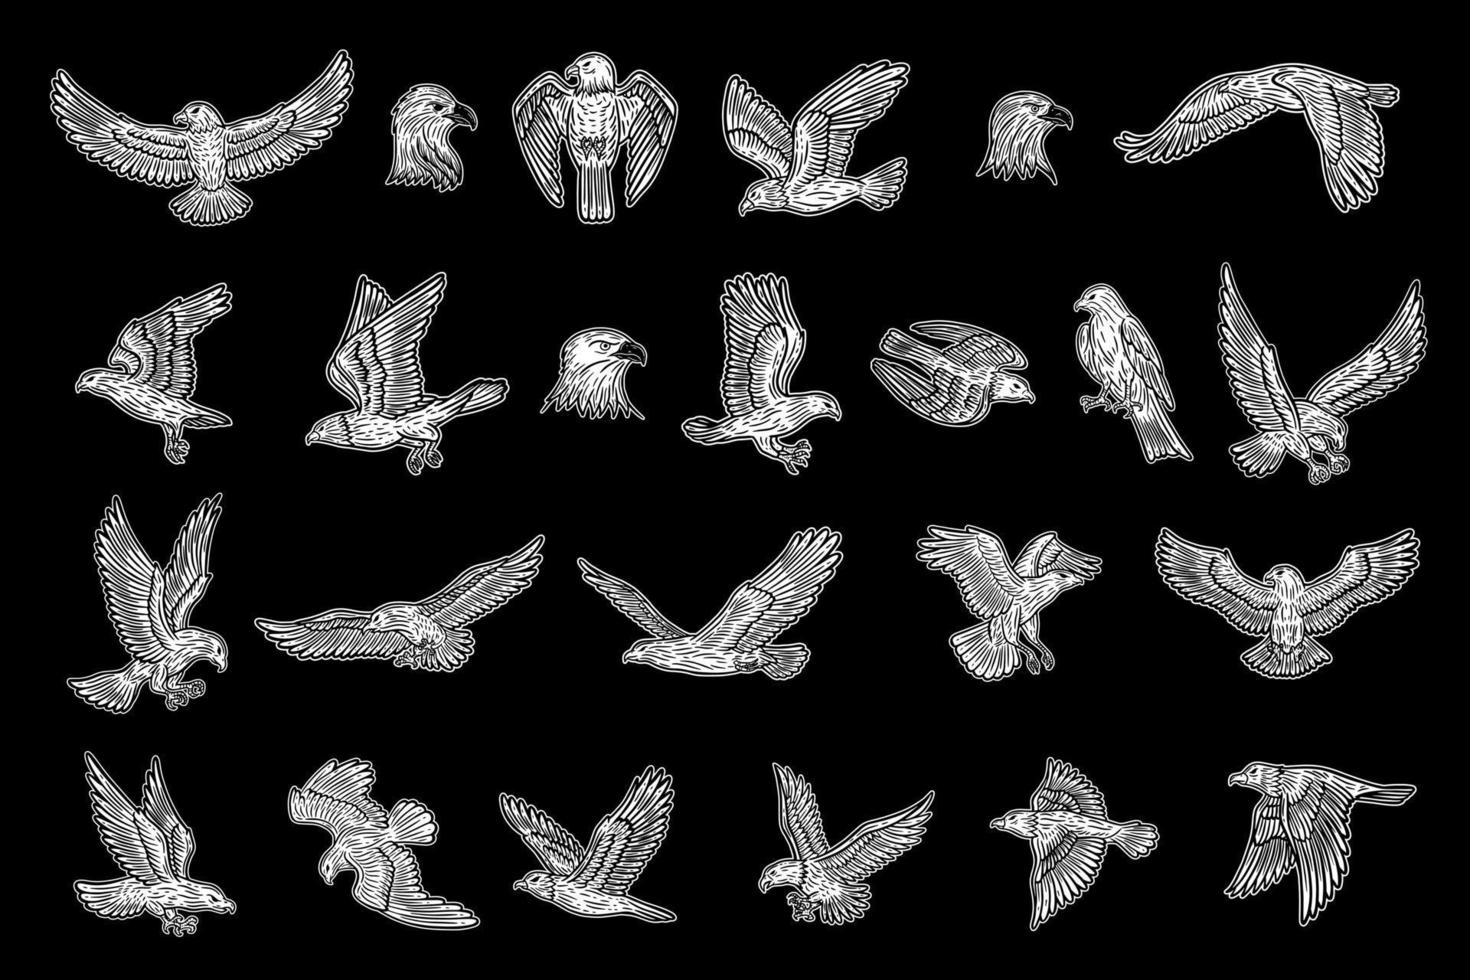 Set Mega Collection Bundle of Eagle Bird Animal Wings Flying Hand Drawn For Tattoo and t-shirt art illustration vector